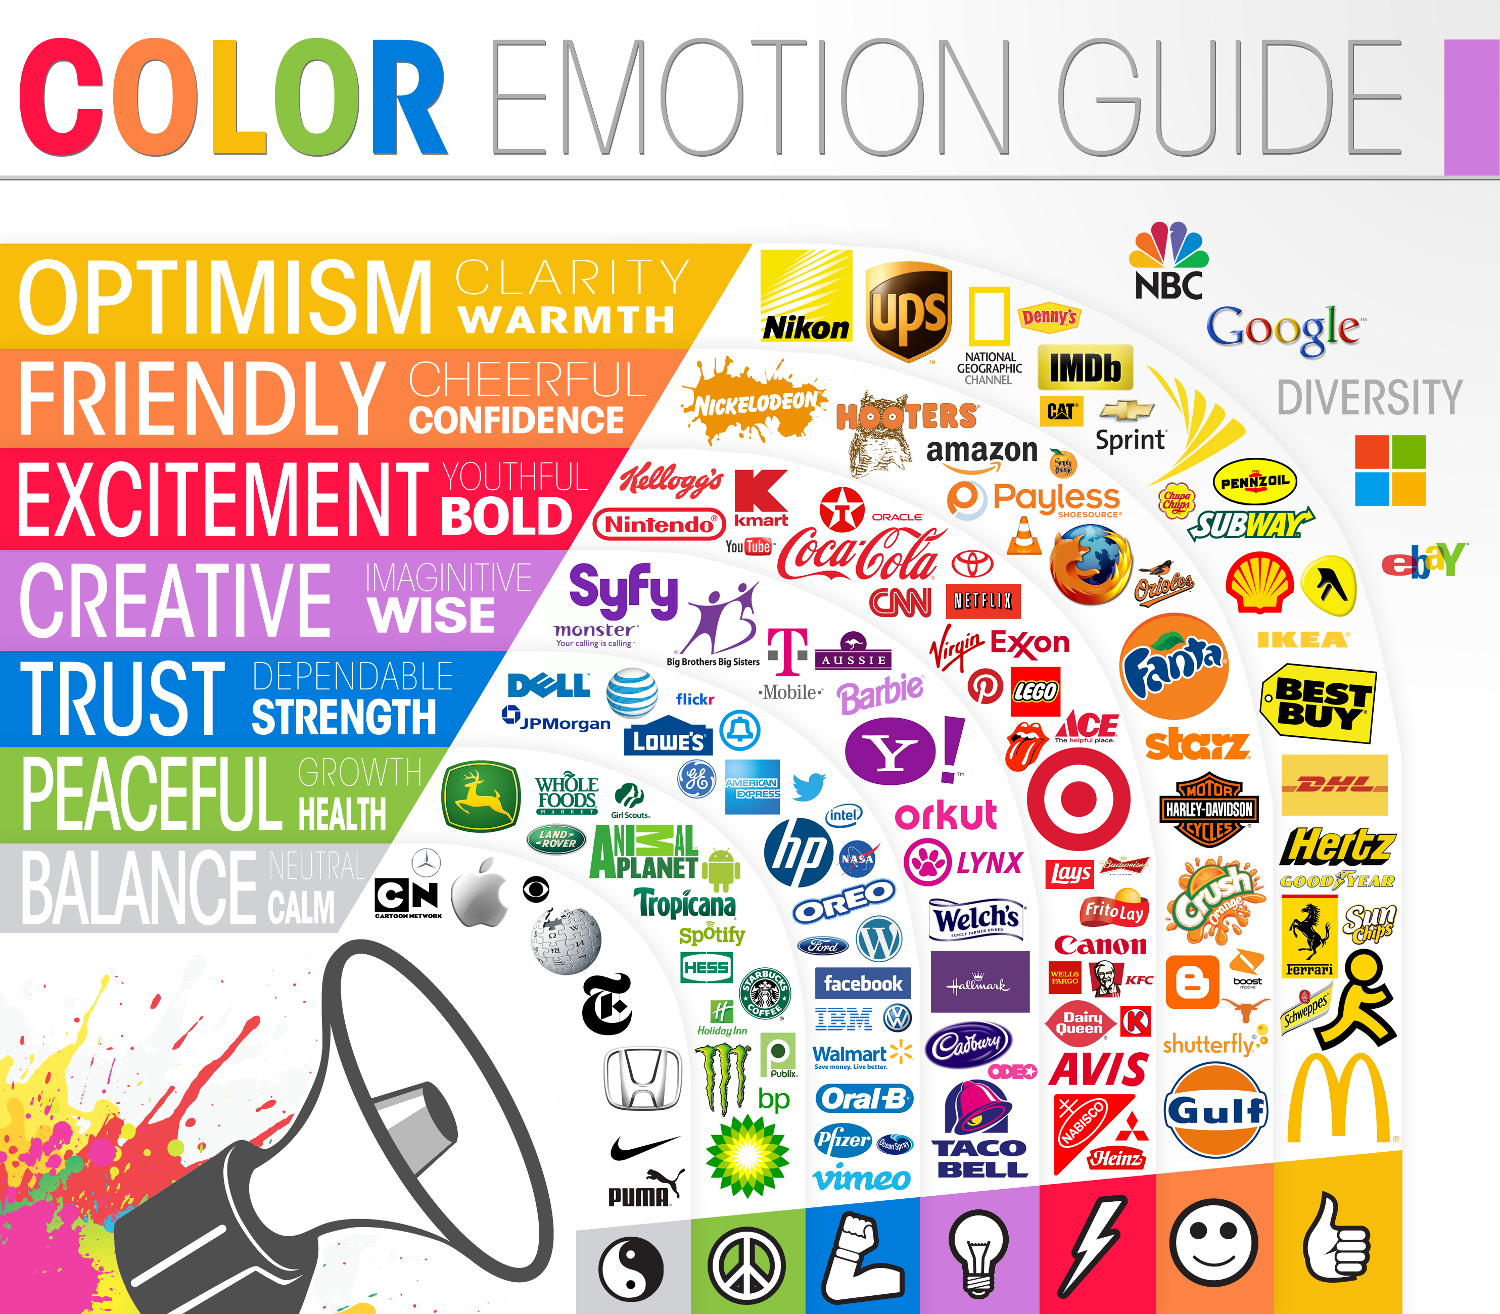 The science, emotion and personality traits associated with colors